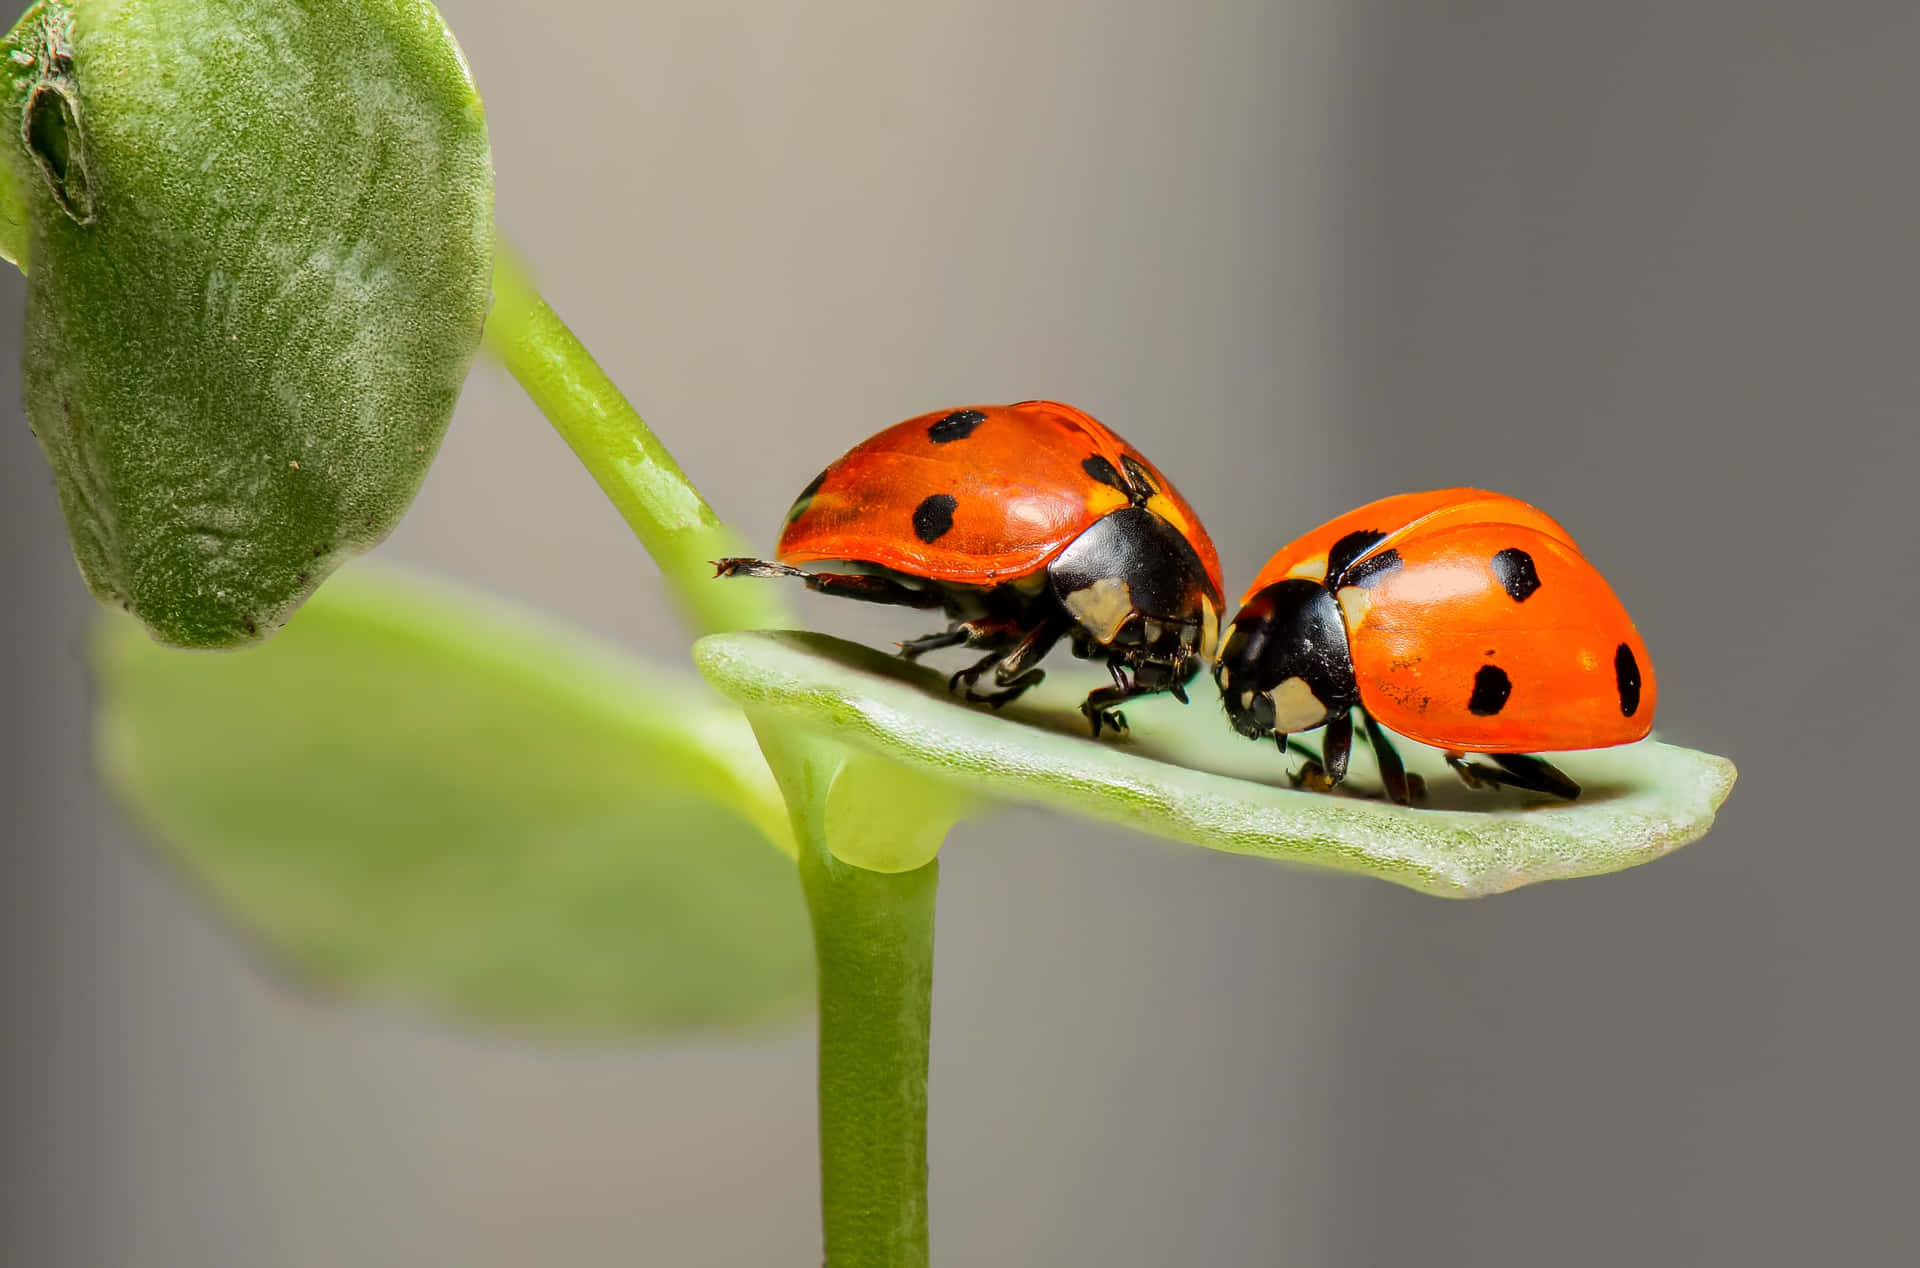 Couple Insects In Wild Wallpaper